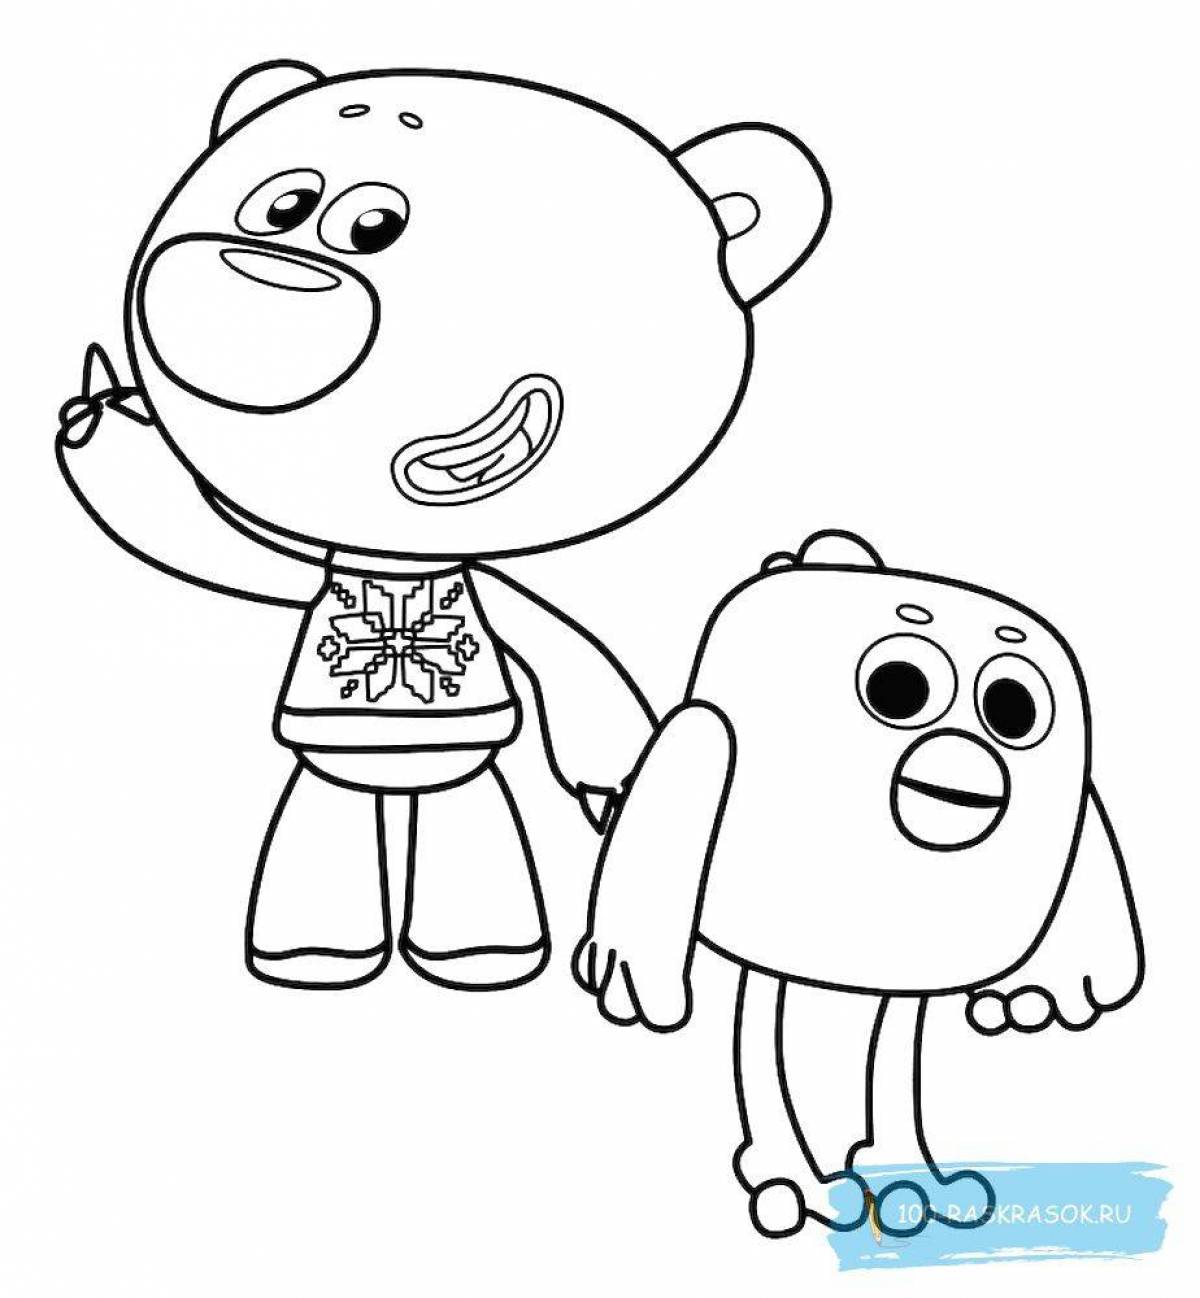 Courtesy bears coloring pages